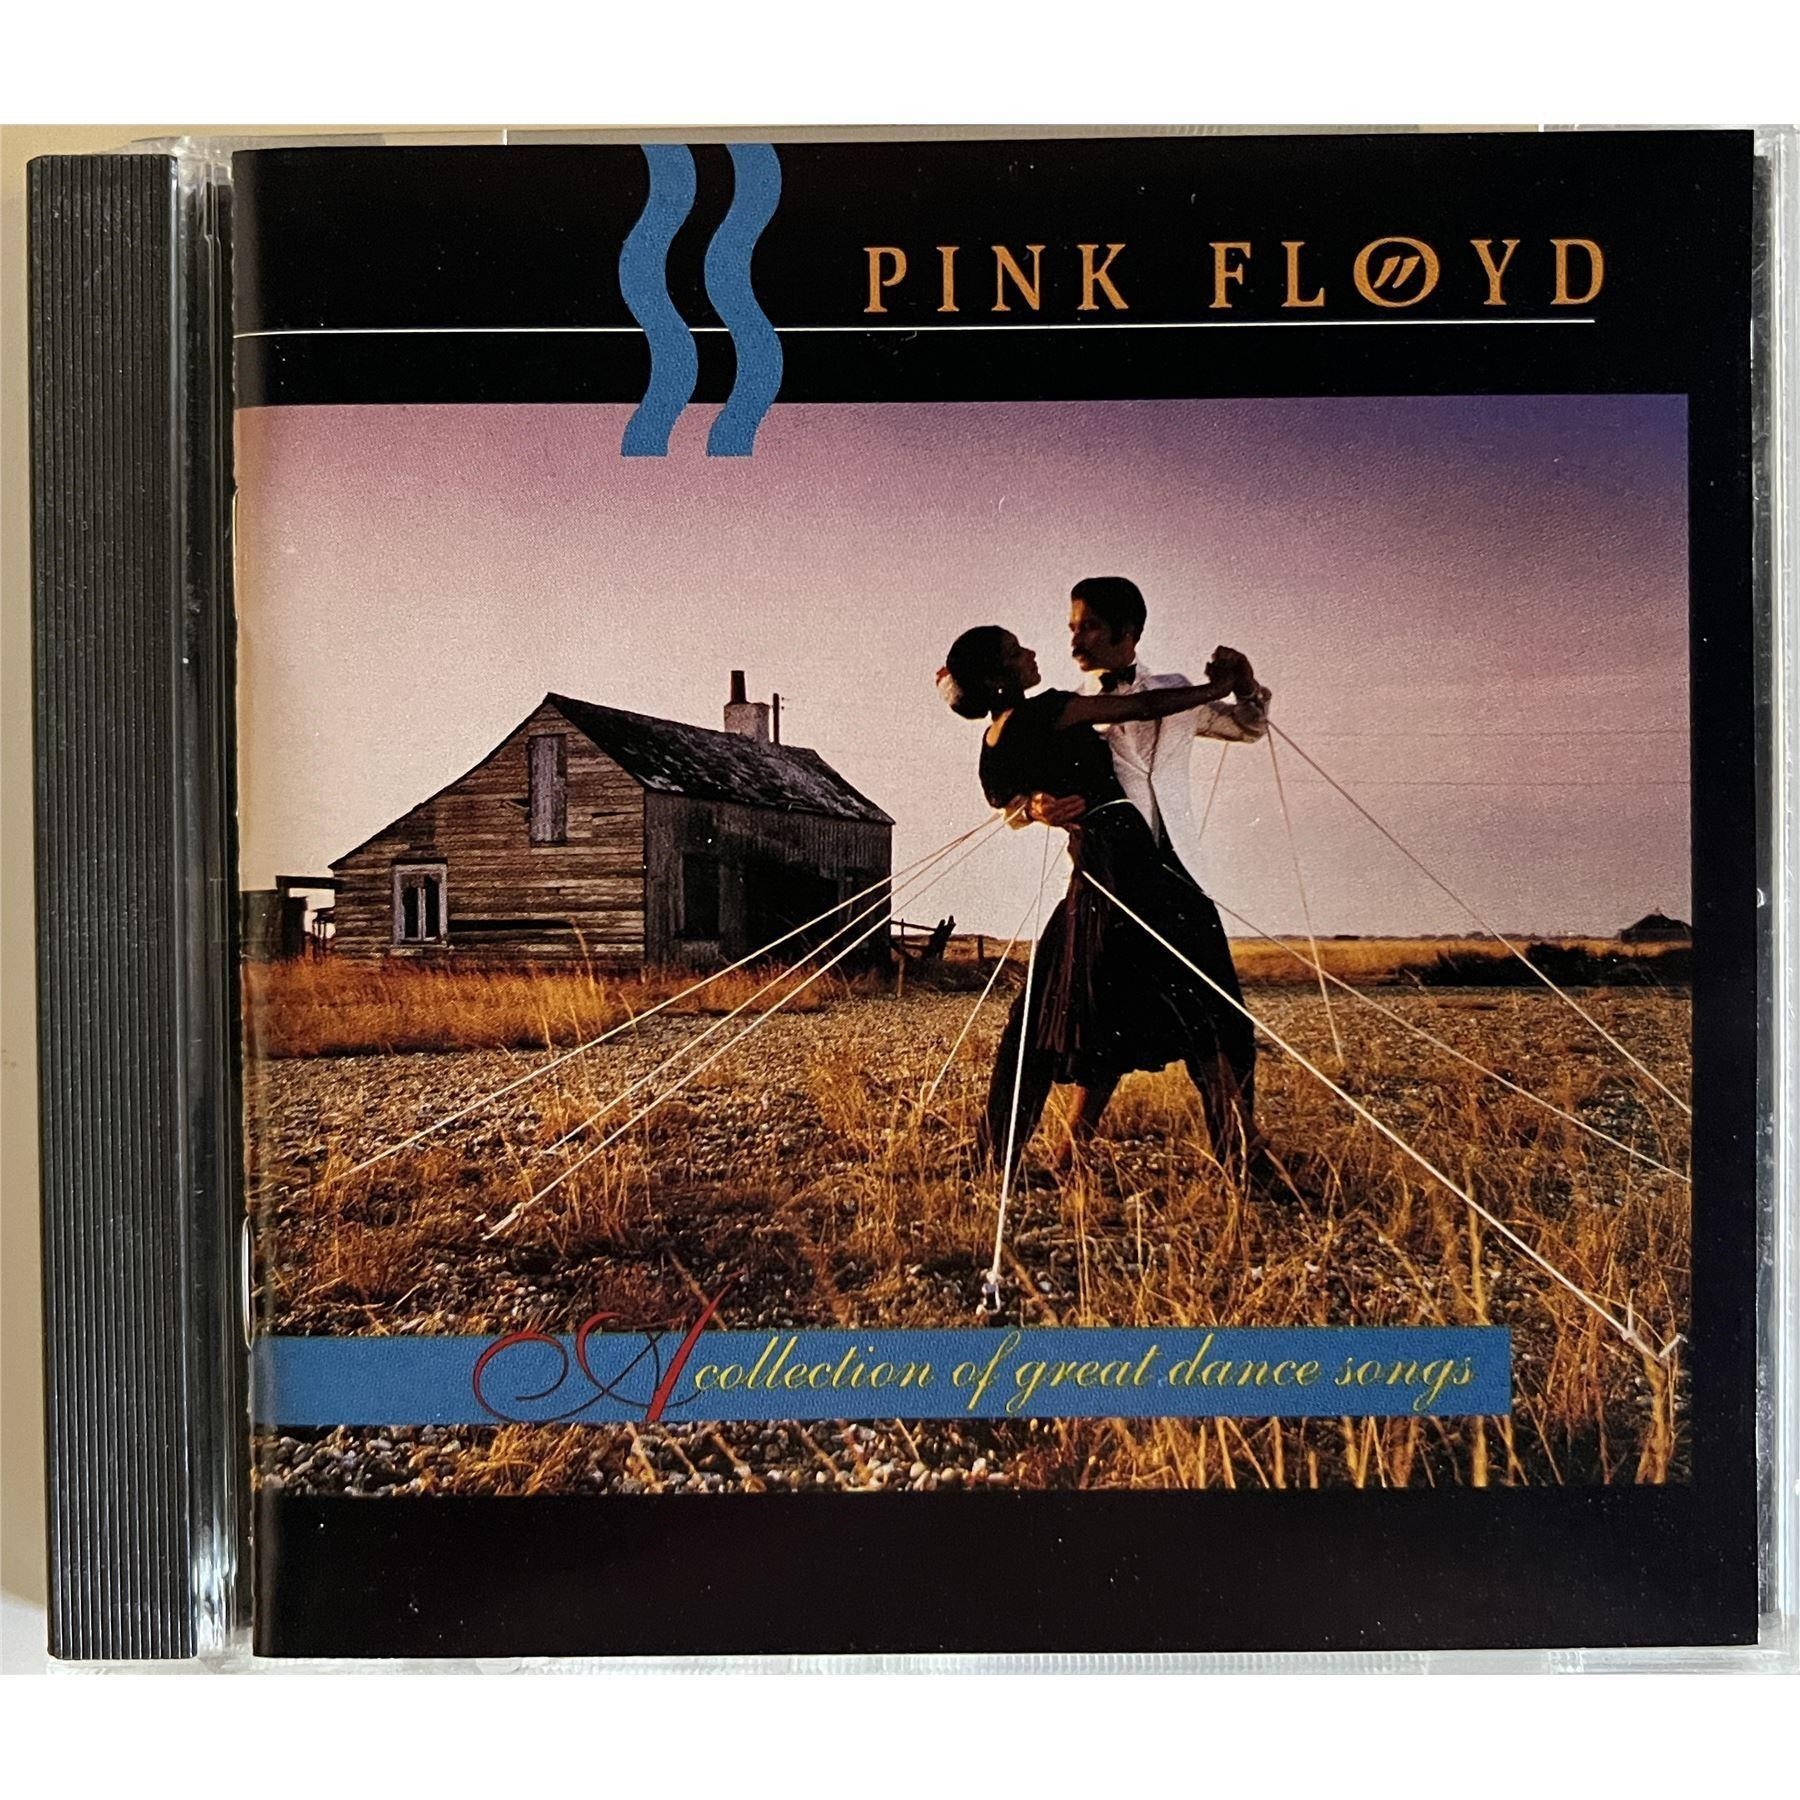 Pink Floyd A Collection Of Great Dance Songs CD